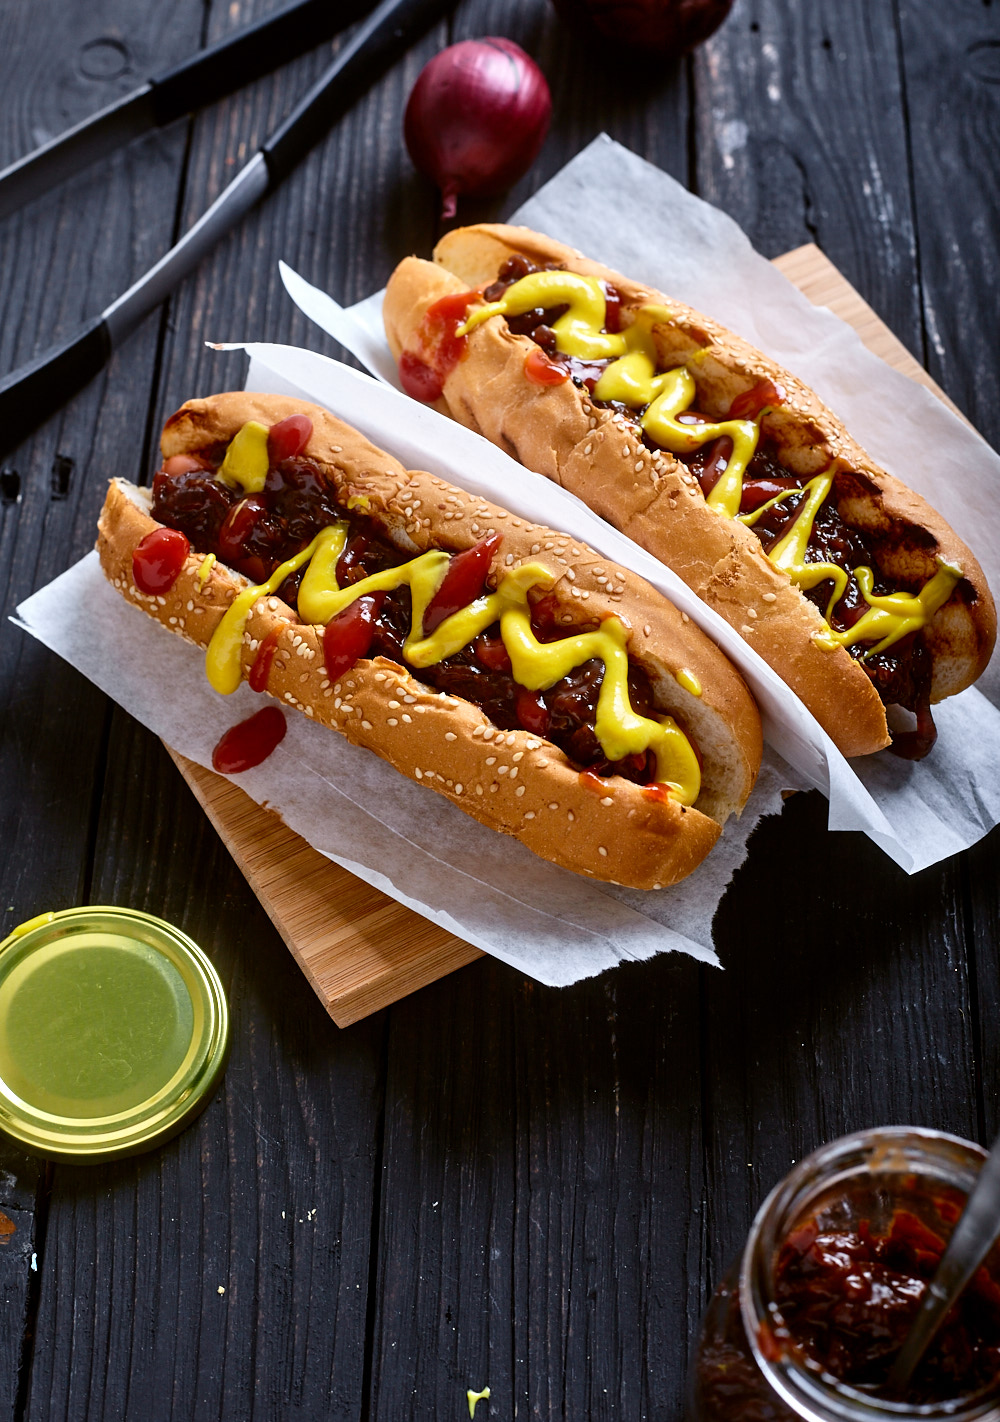 New York Hot Dog easy to make step-by-step recipe